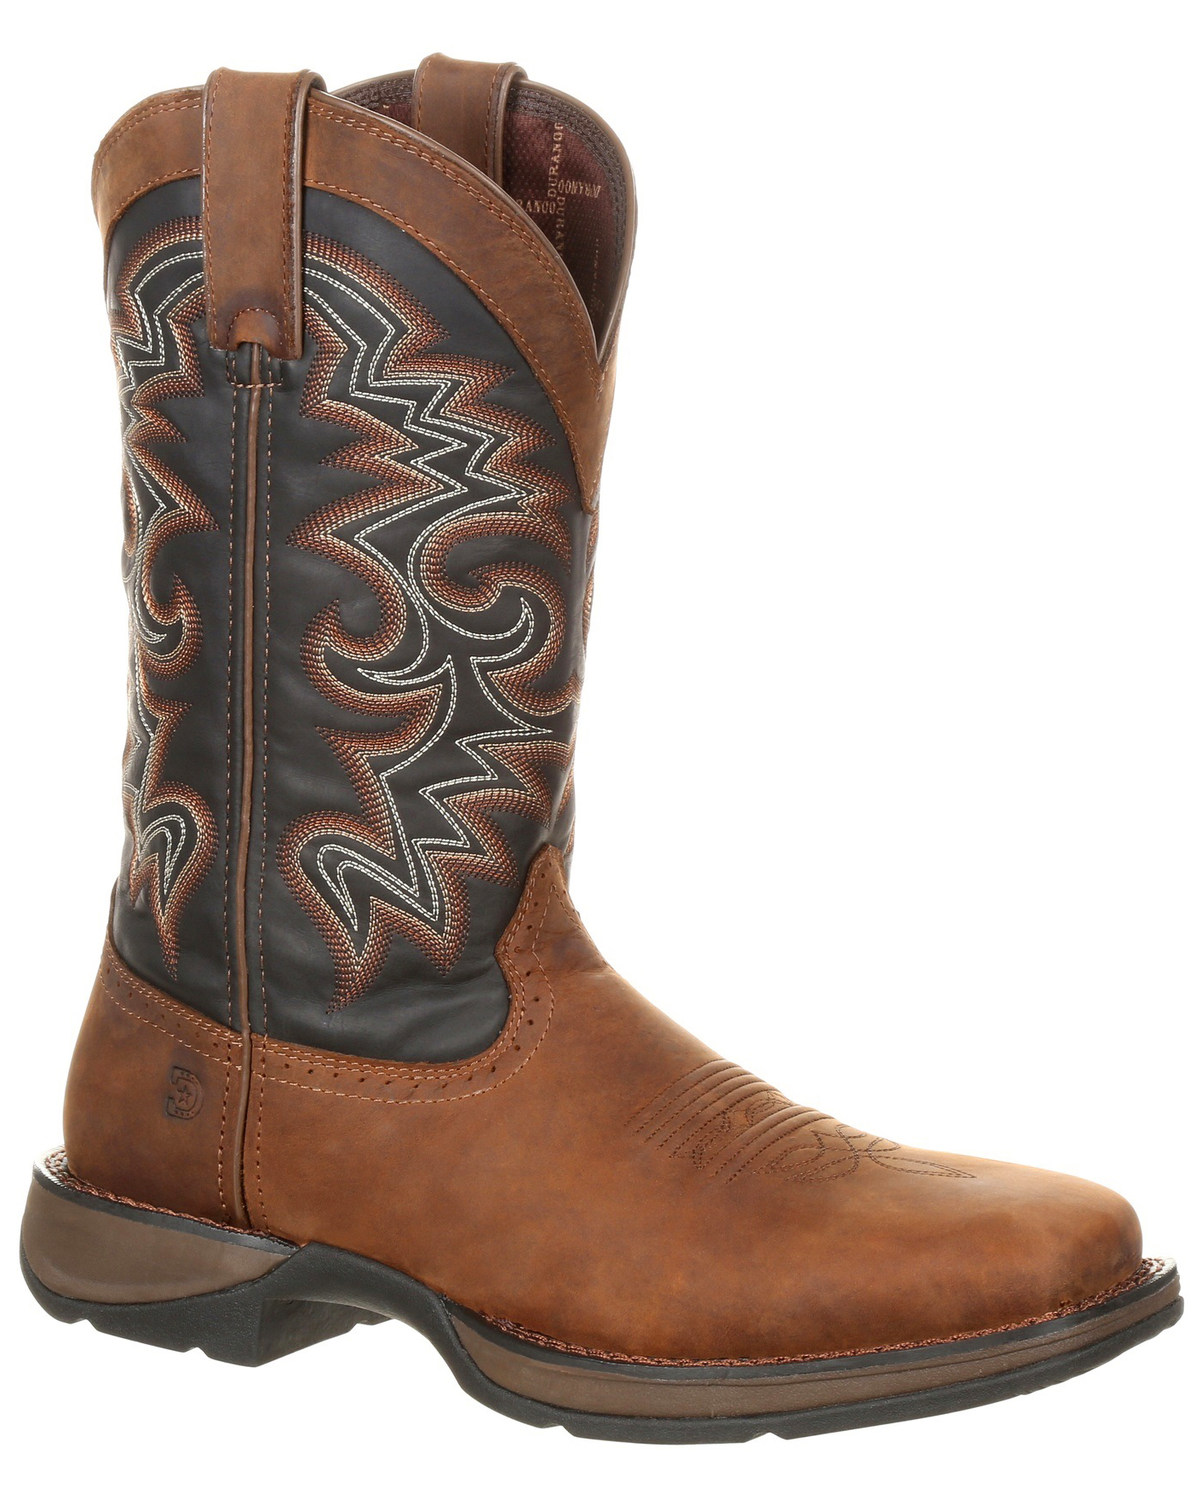 Durango Men's Rebel Pull On Western Performance Boots - Broad Square Toe